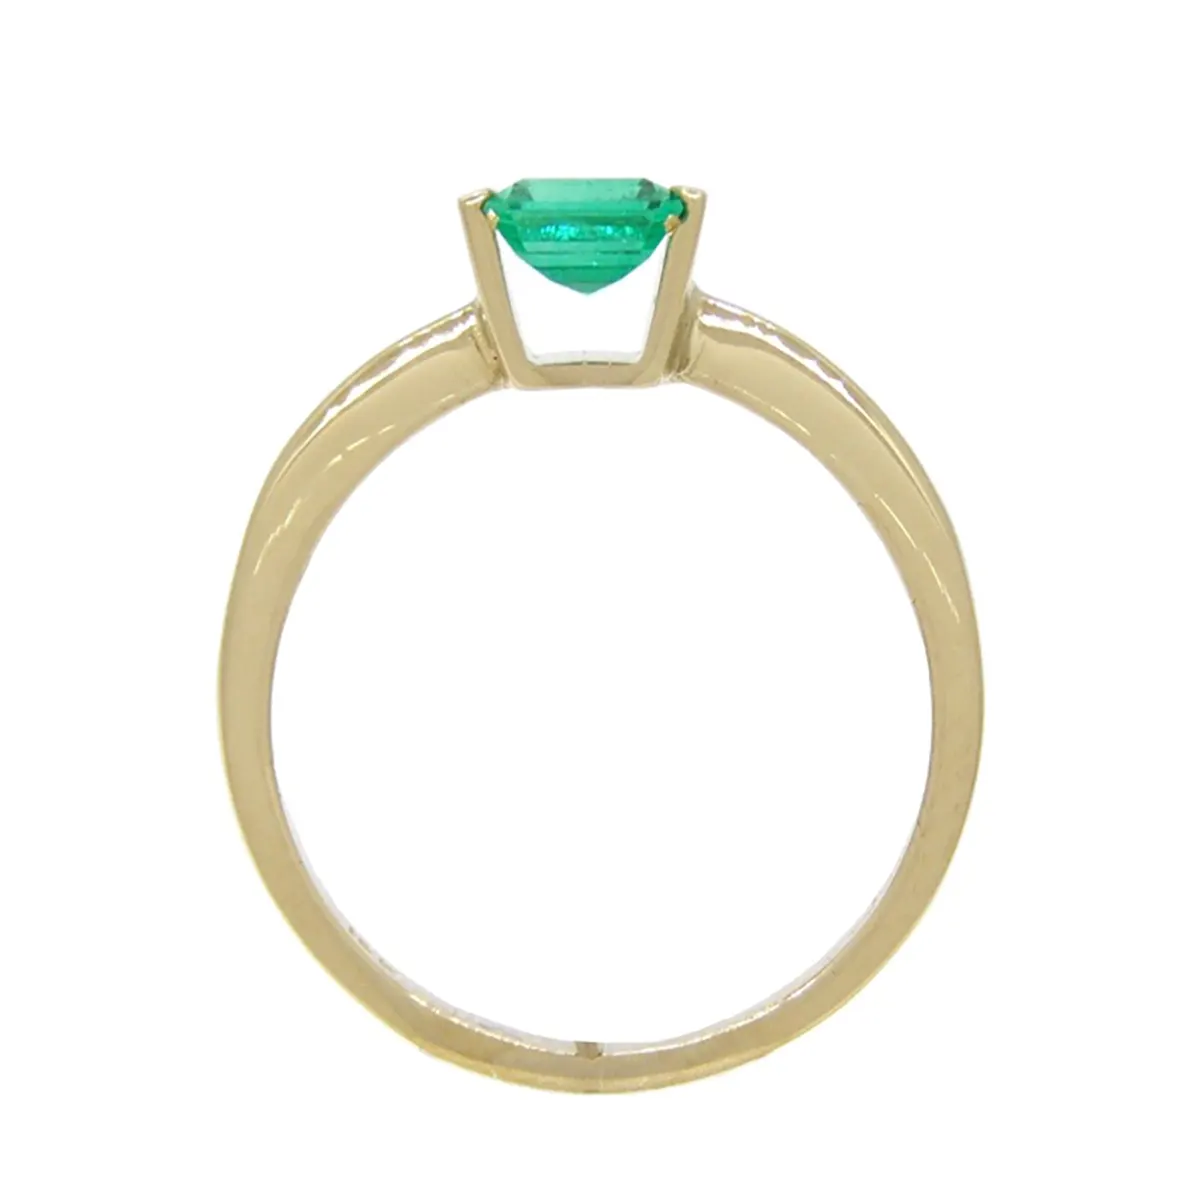 emerald-cut-emerald-solitaire-ring-in-18k-yellow-gold-tension-setting-ring-style